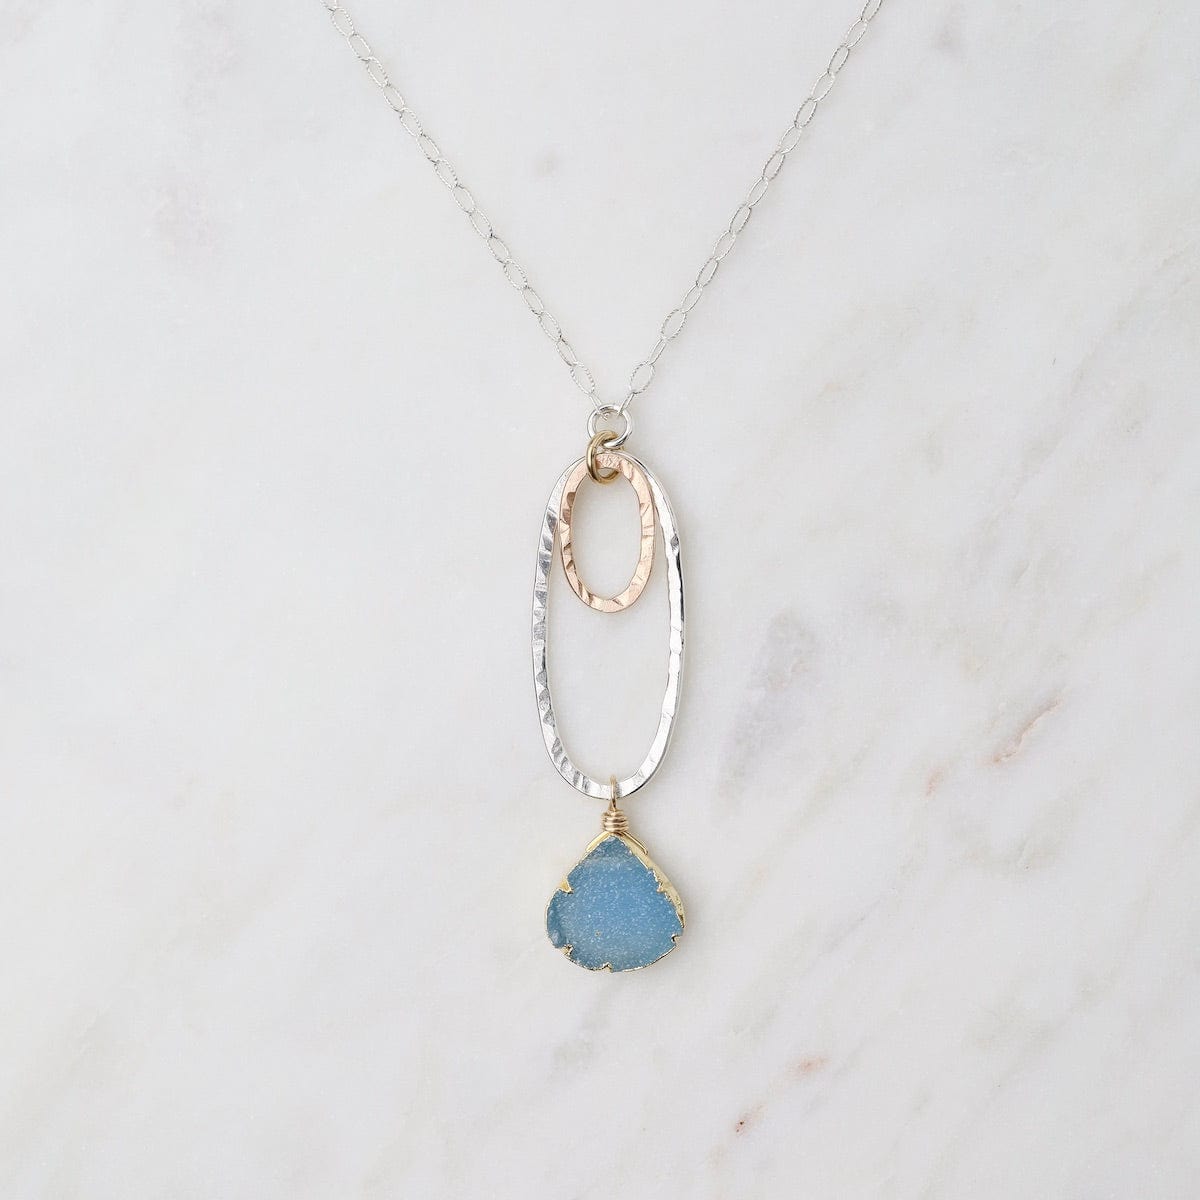 NKL-GF Double Oval with Blue Druzy Pendant Necklace